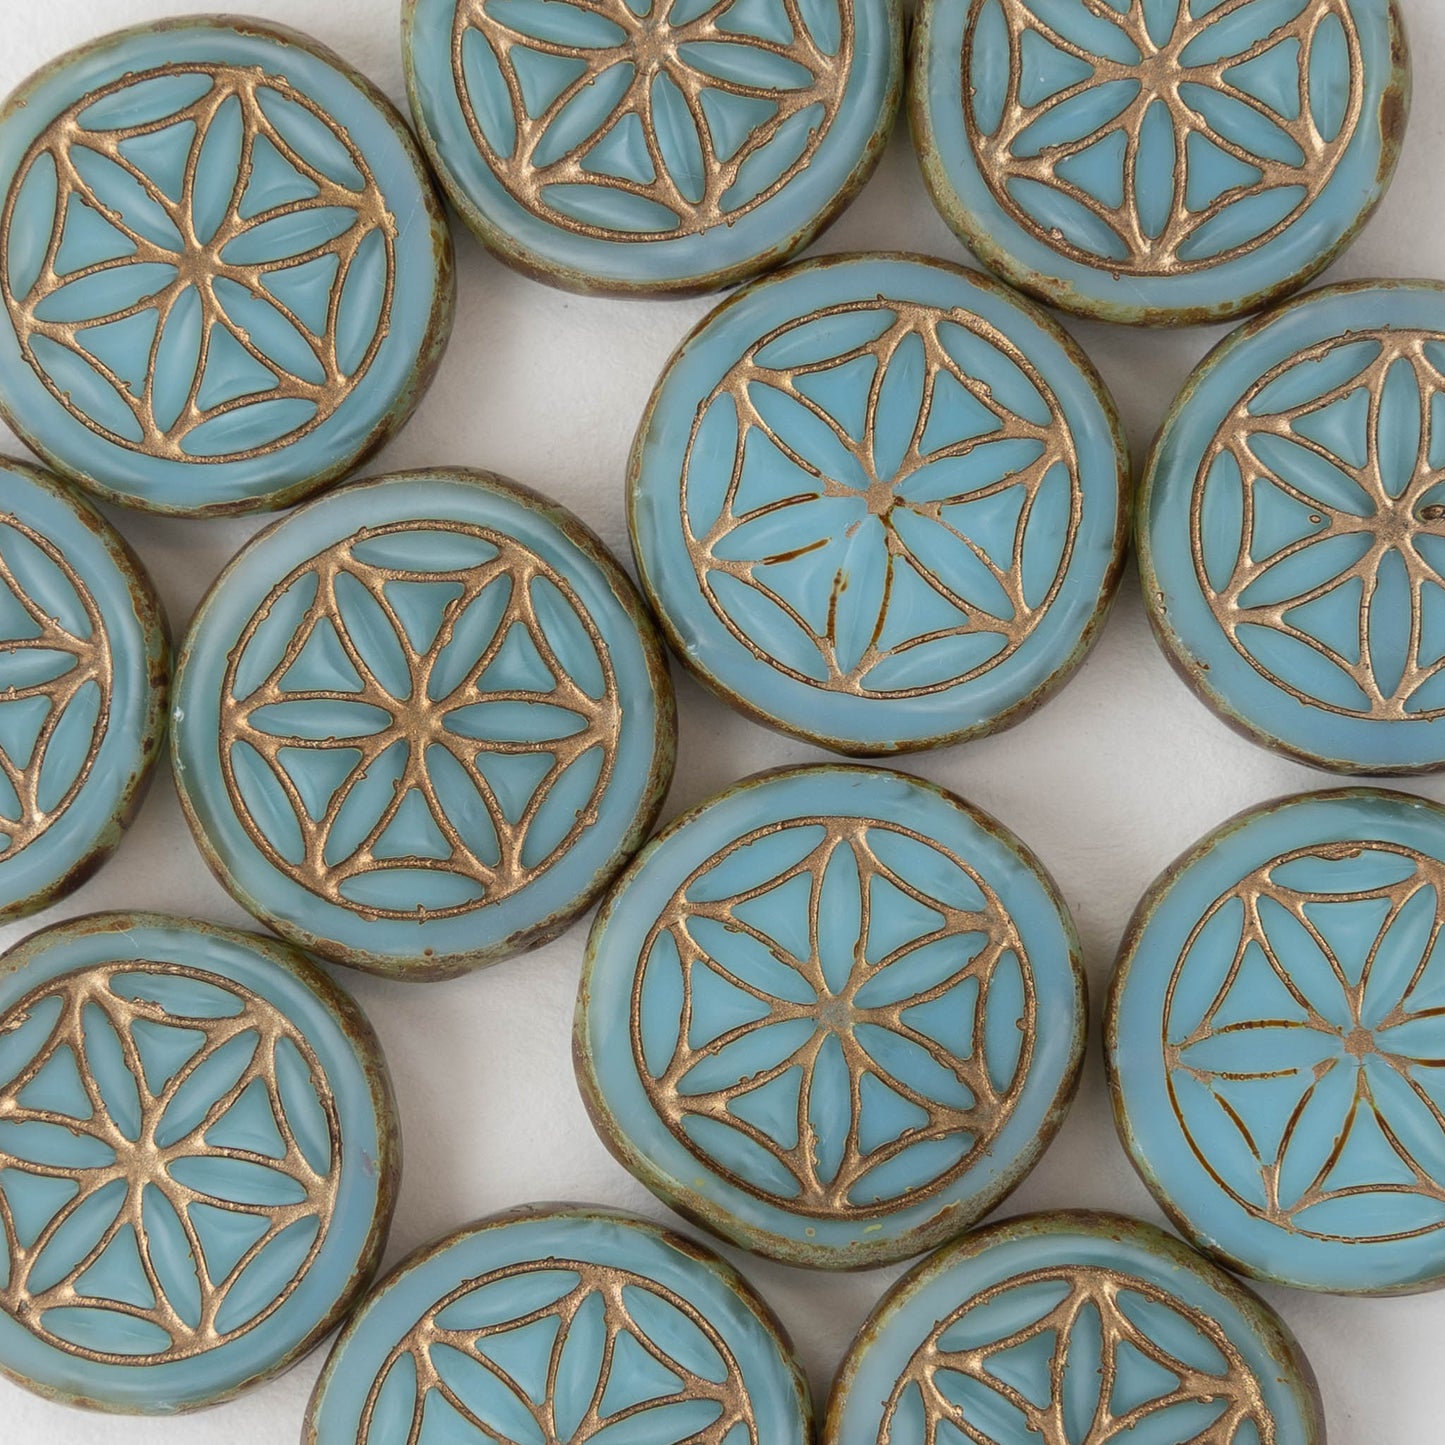 19mm Flower of Life Coin Bead - Light Blue with Gold Wash - 2 beads